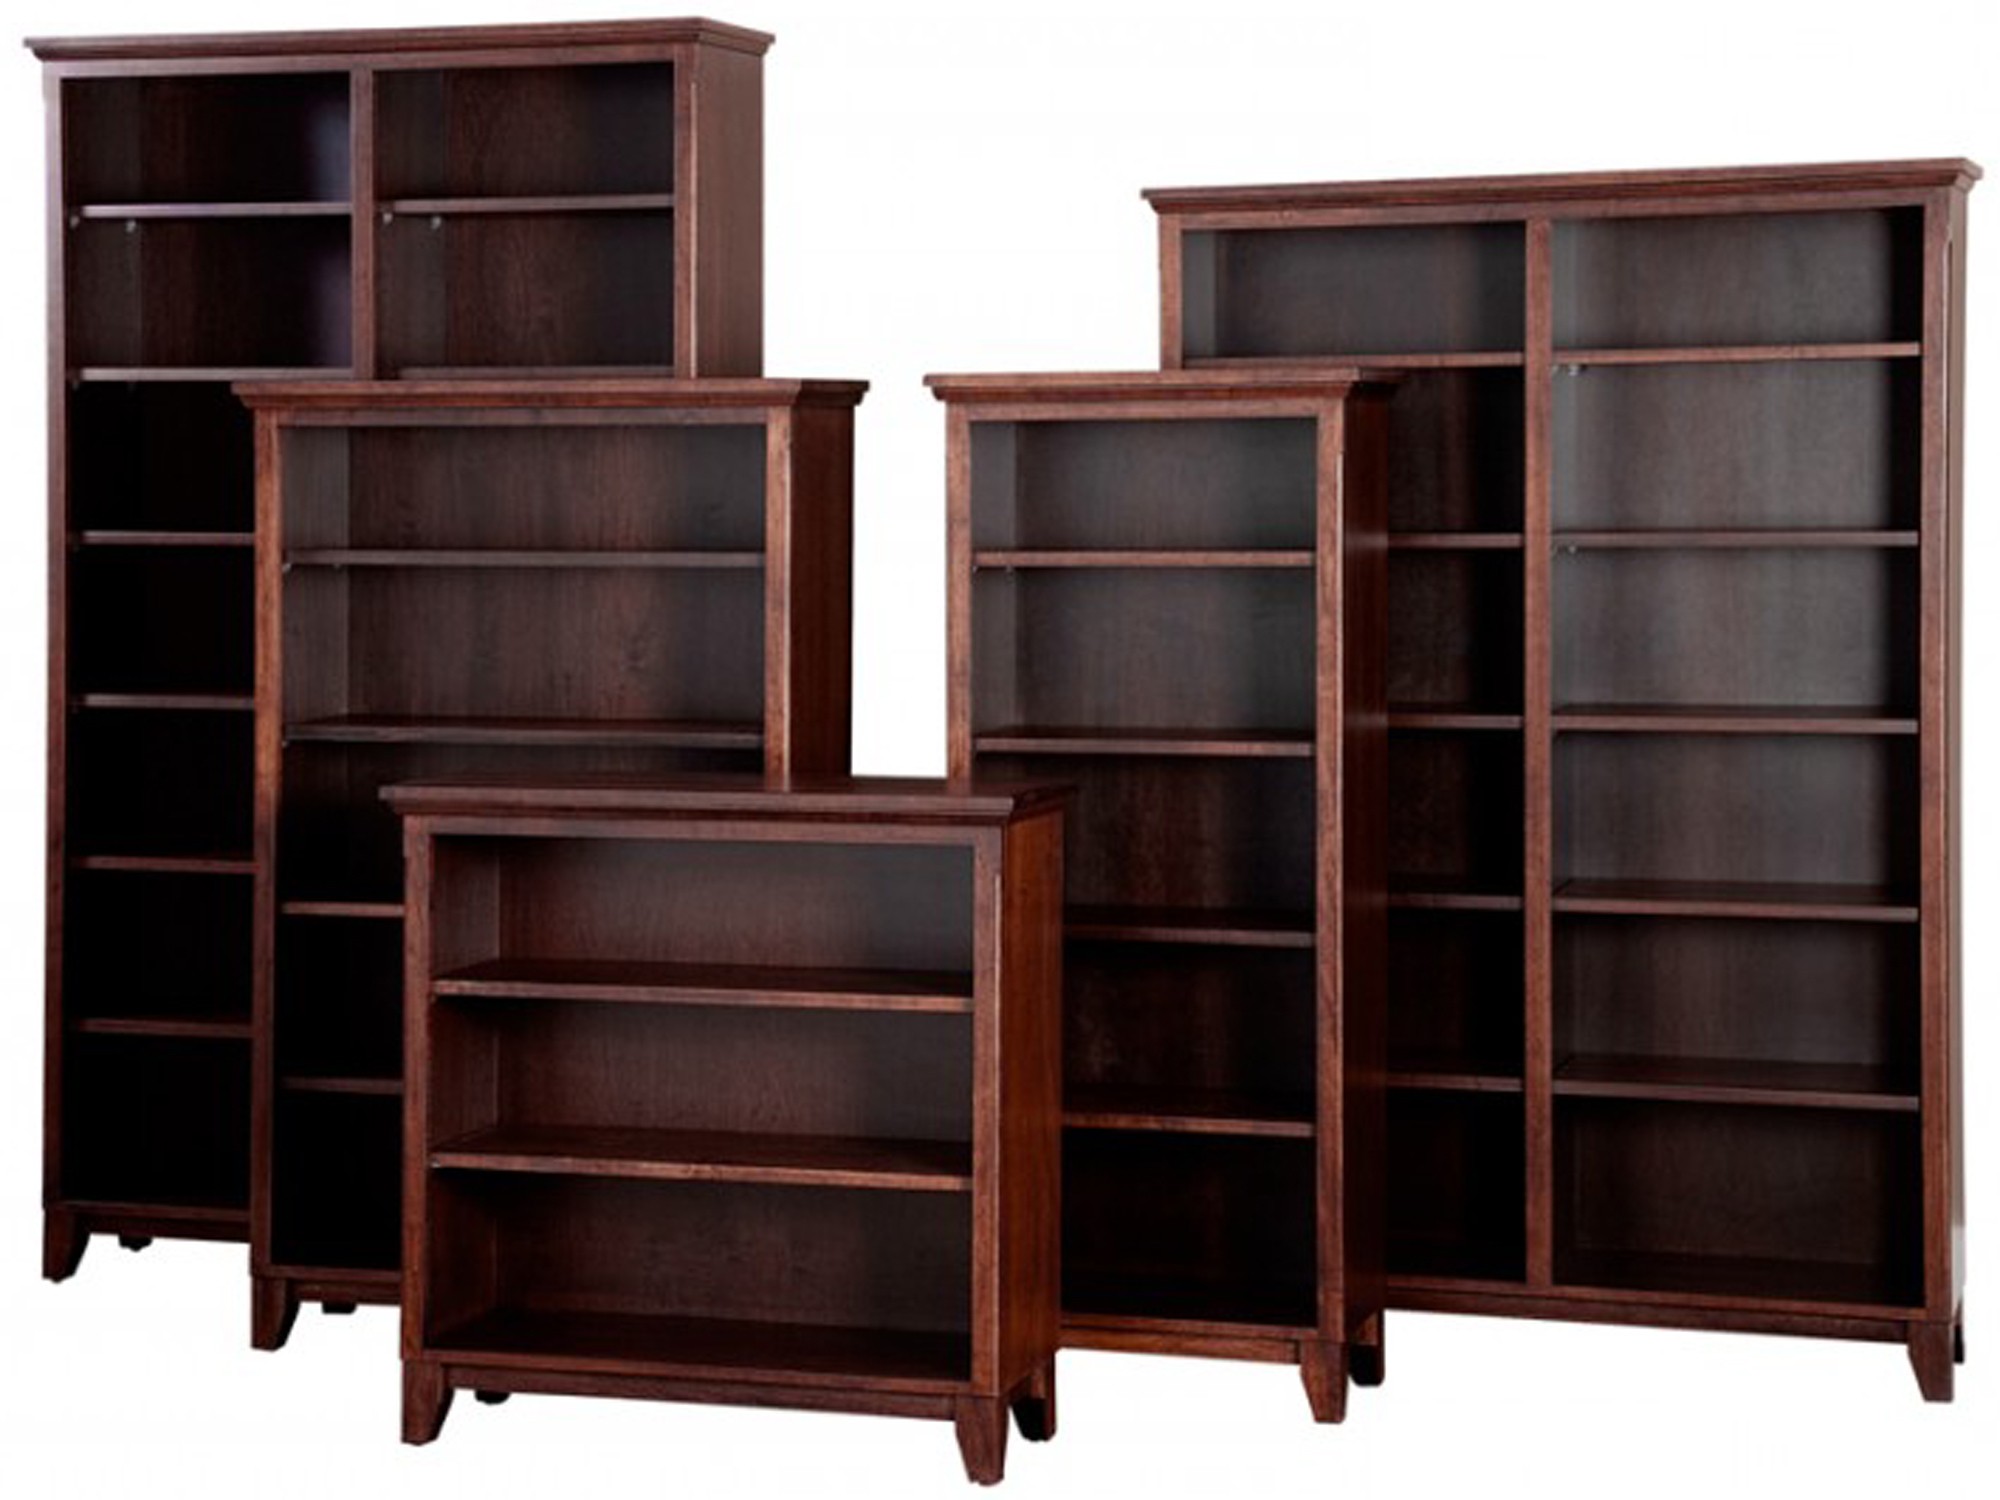 Mission bookcase by woodworks creative home furnishings